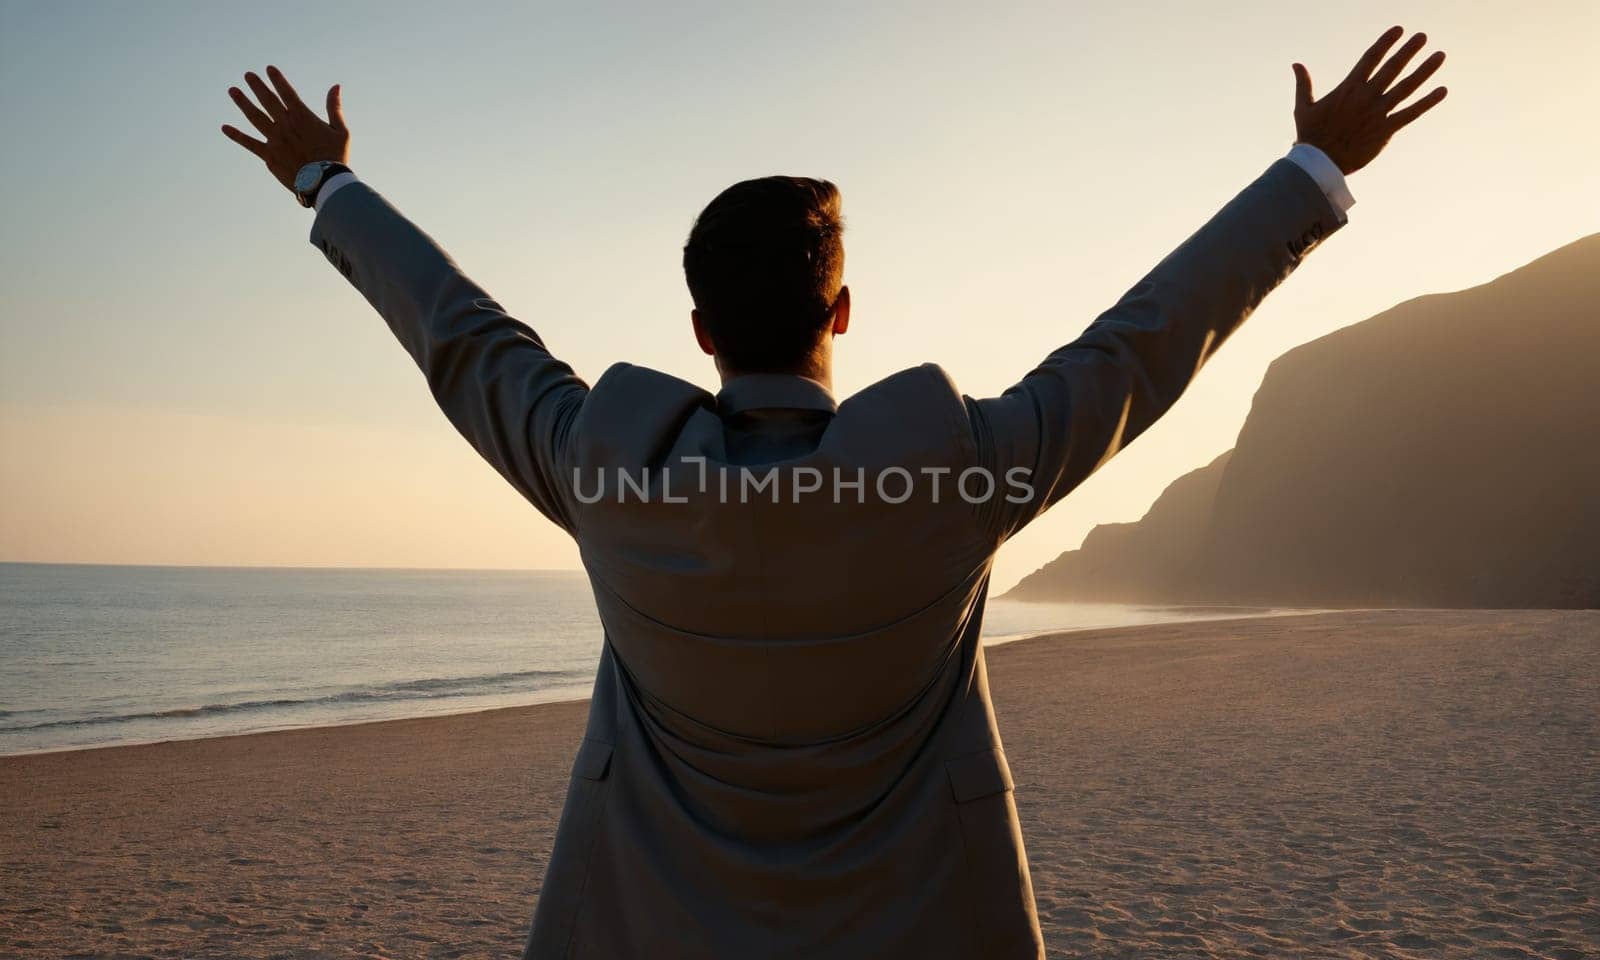 A person stands with arms raised on a serene beach. The silhouette is highlighted against the backdrop of a tranquil ocean and towering mountains.